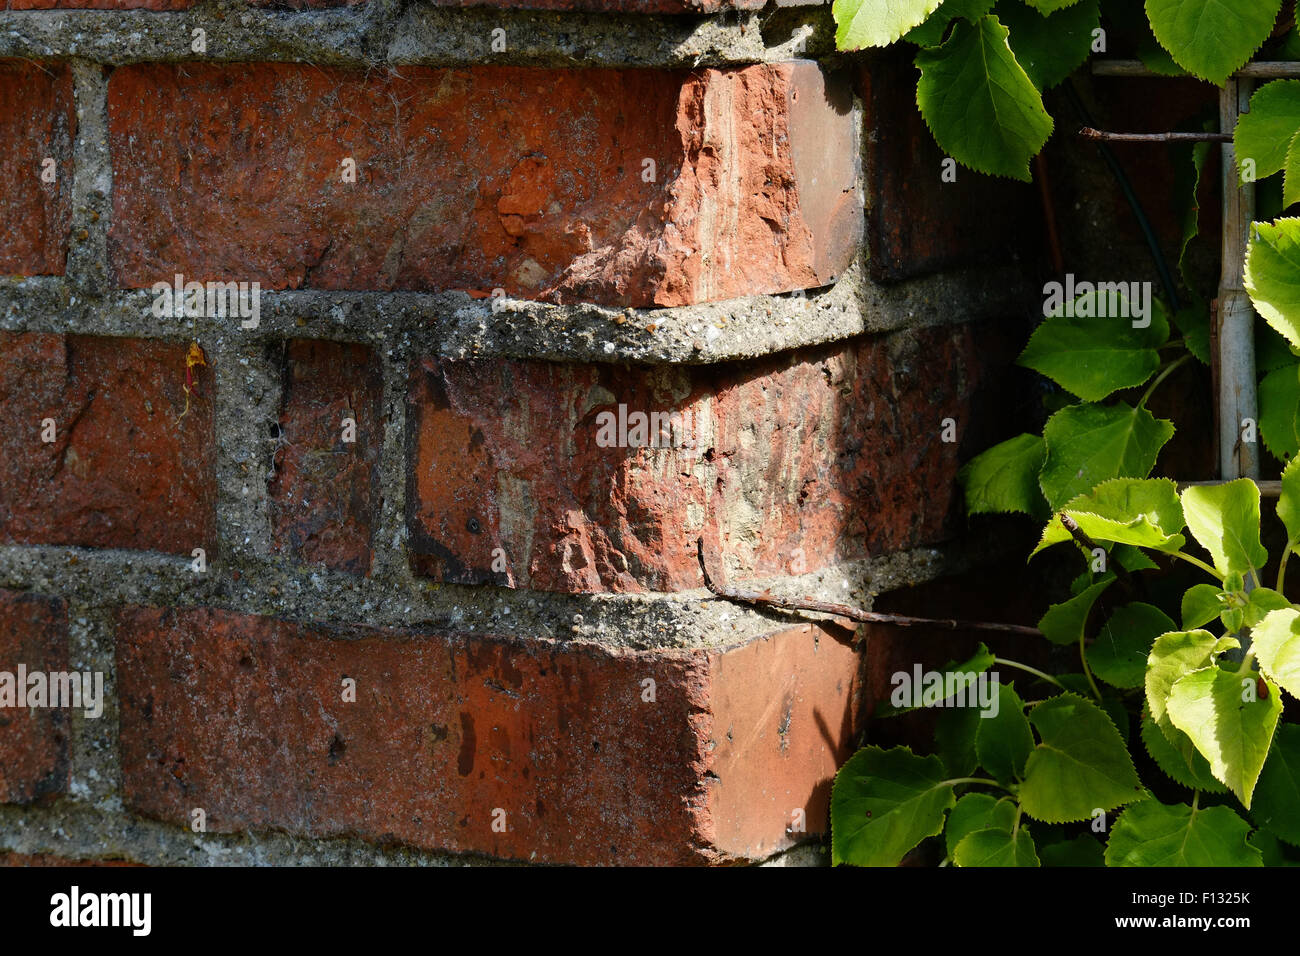 Brick erosion on old wall with strong cement. Stock Photo